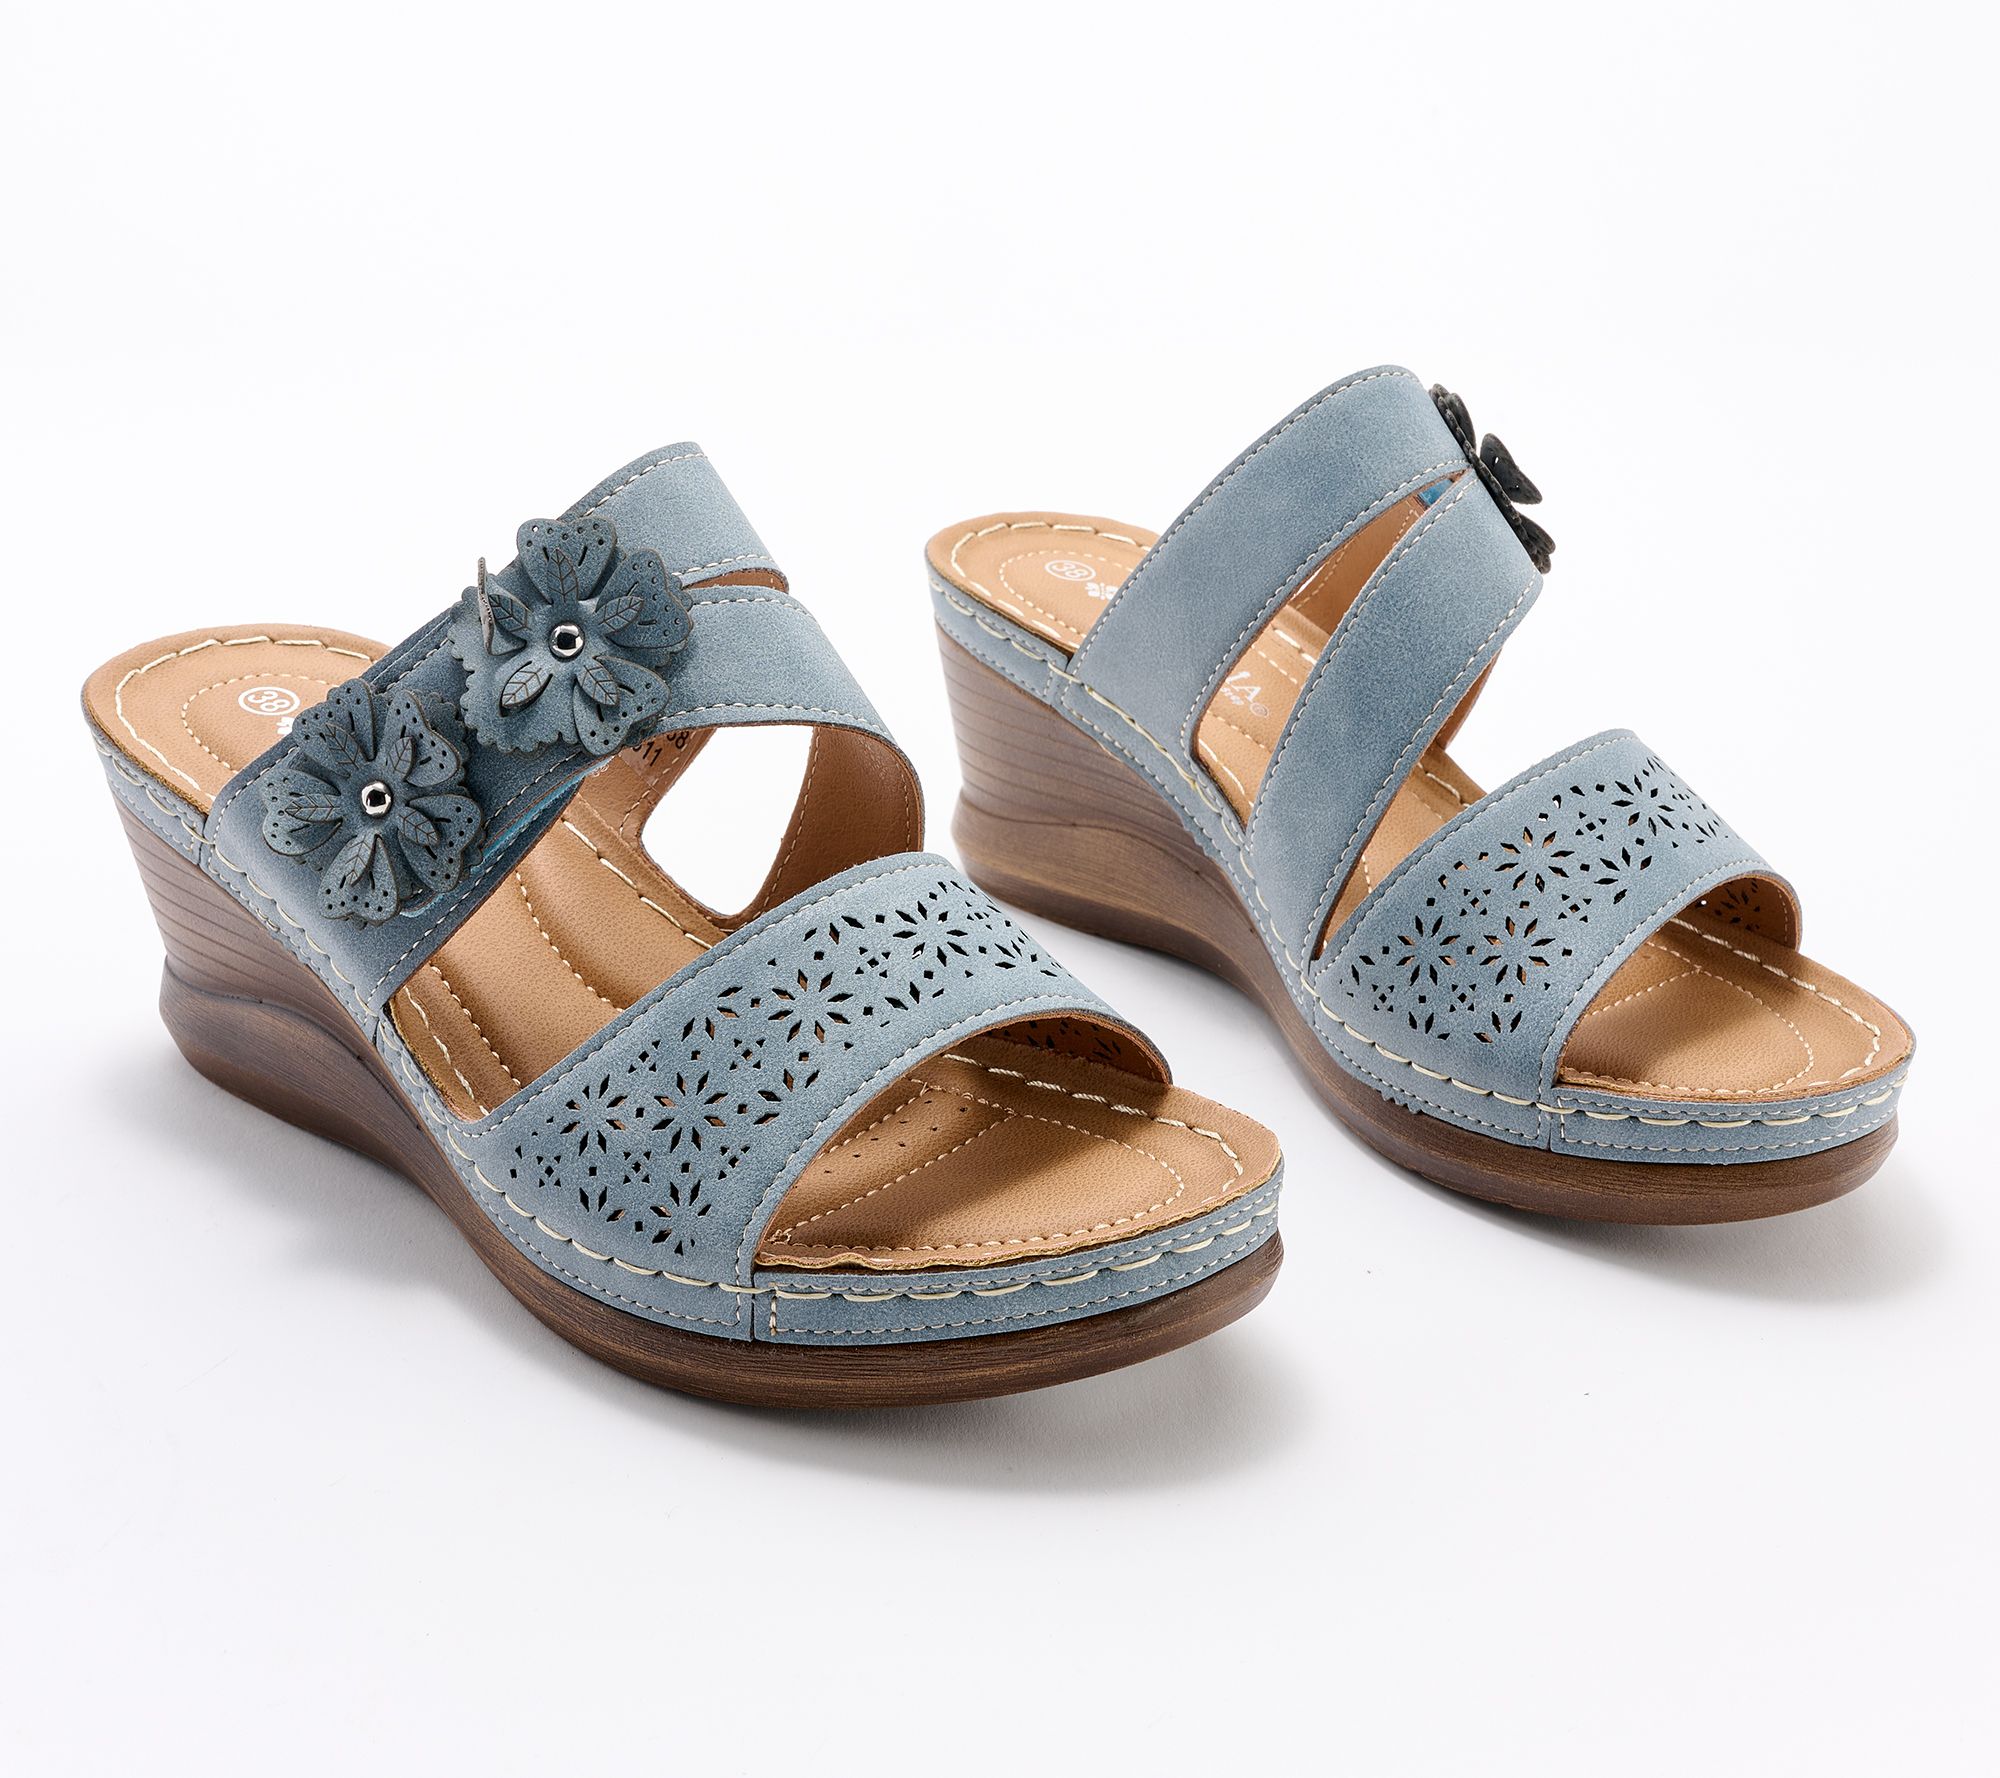 Patrizia by Spring Step Wedges - Lolly